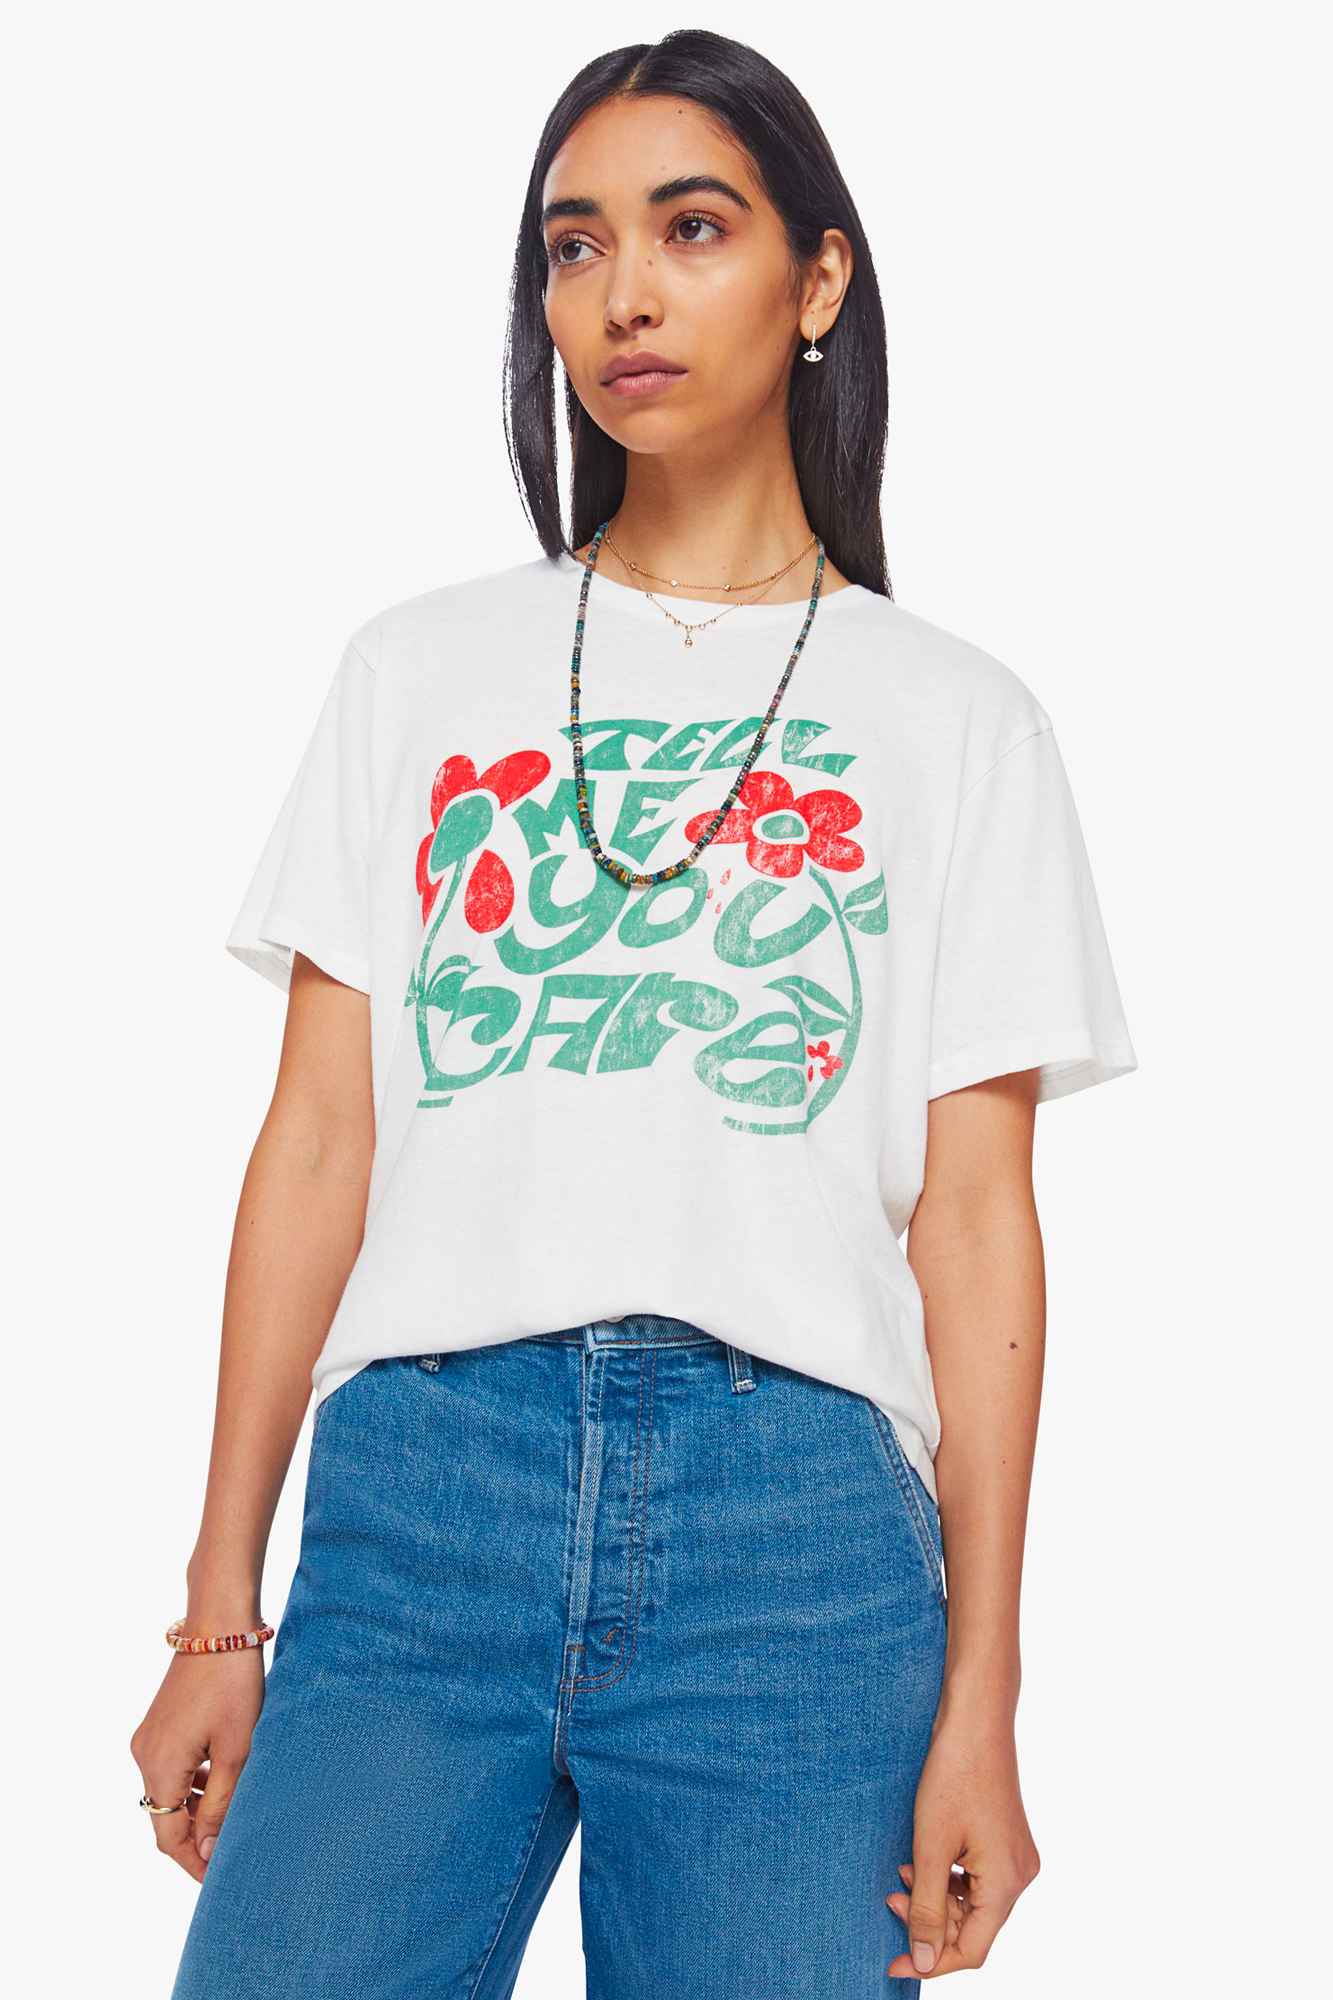 A crewneck tee with an oversized fit. Made from a recycled cotton blend, the white tee features a faded text graphic in green with red flowers on the front.